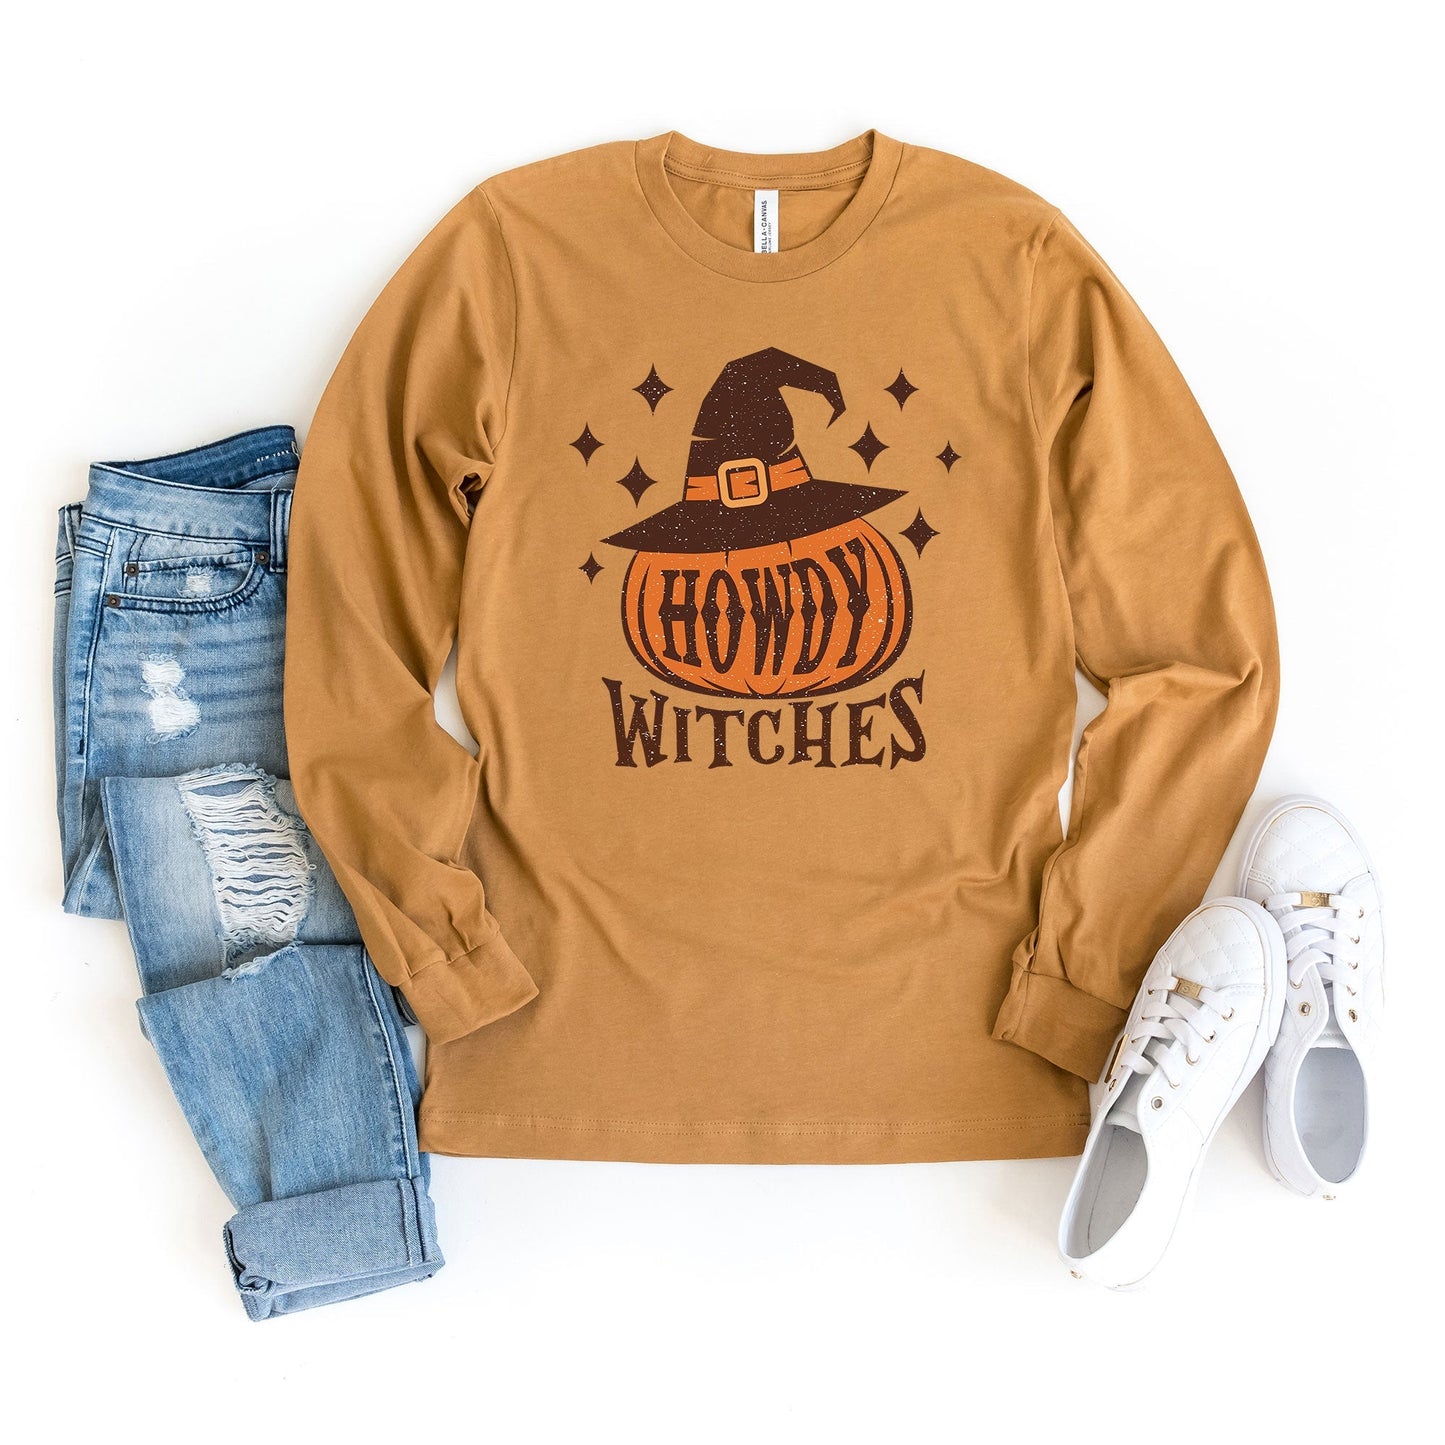 Howdy Witches Stars | Long Sleeve Crew Neck